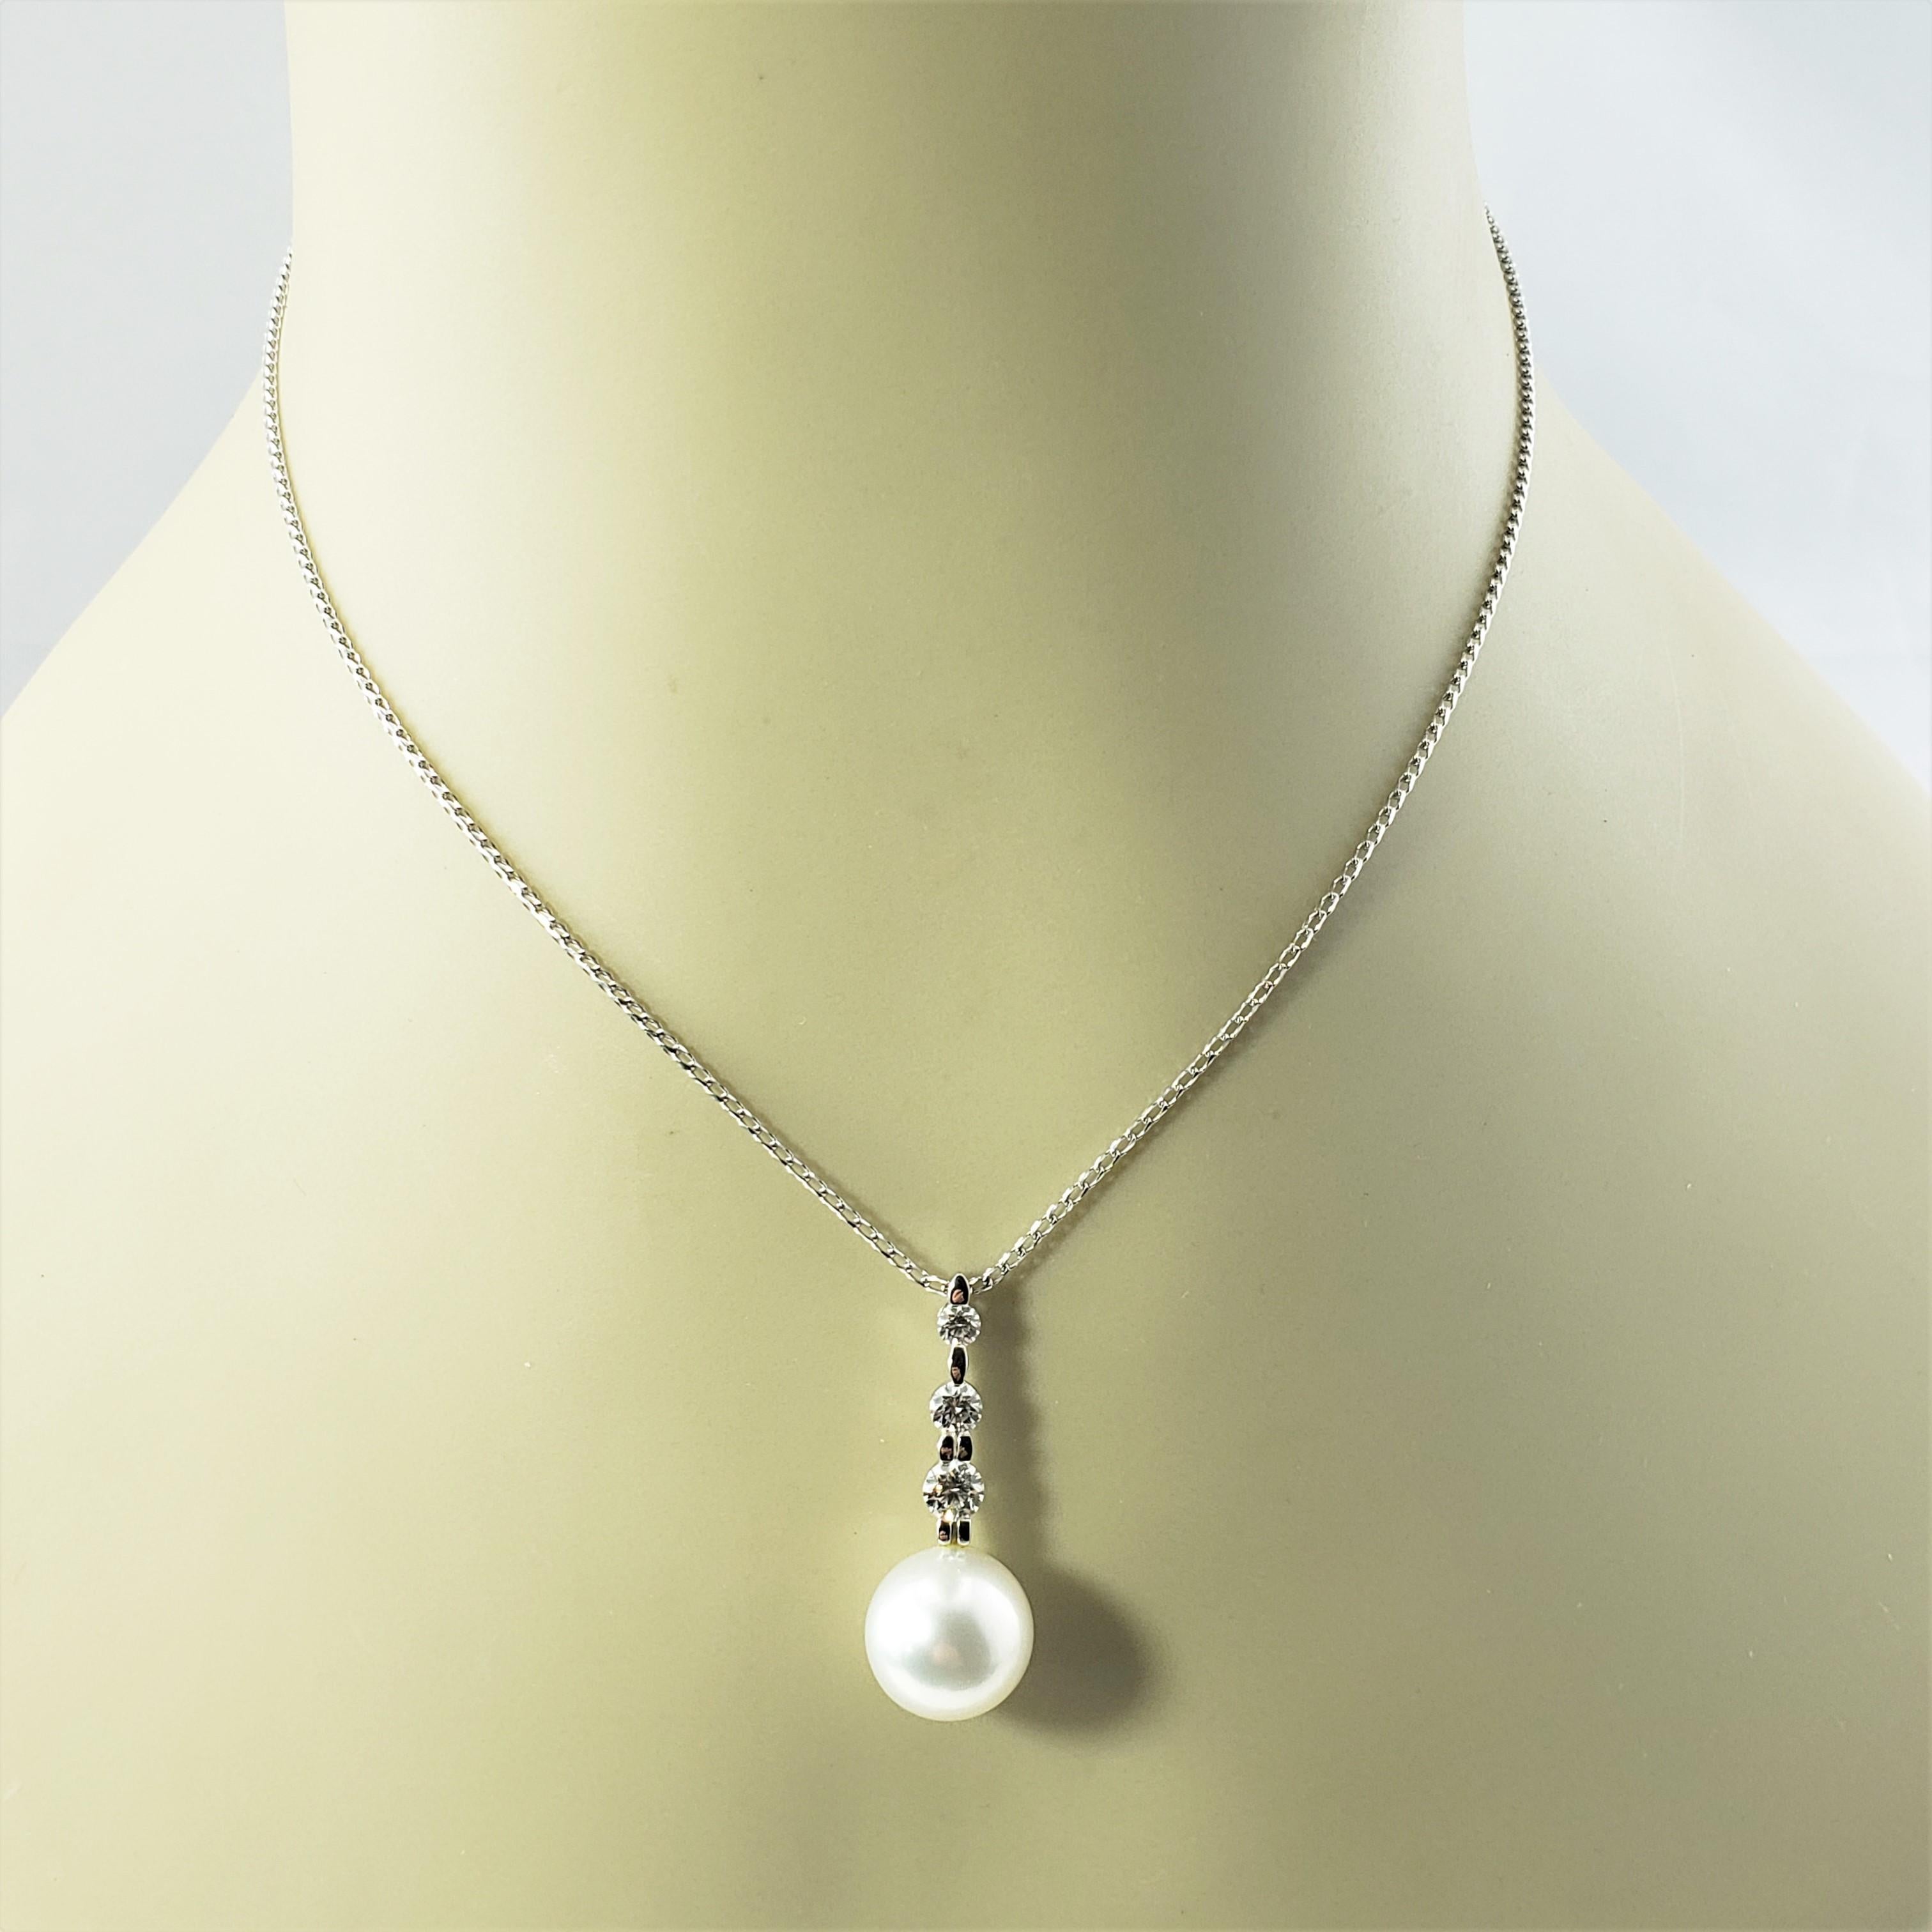 18 Karat White Gold Pearl and Diamond Pendant Necklace For Sale 1